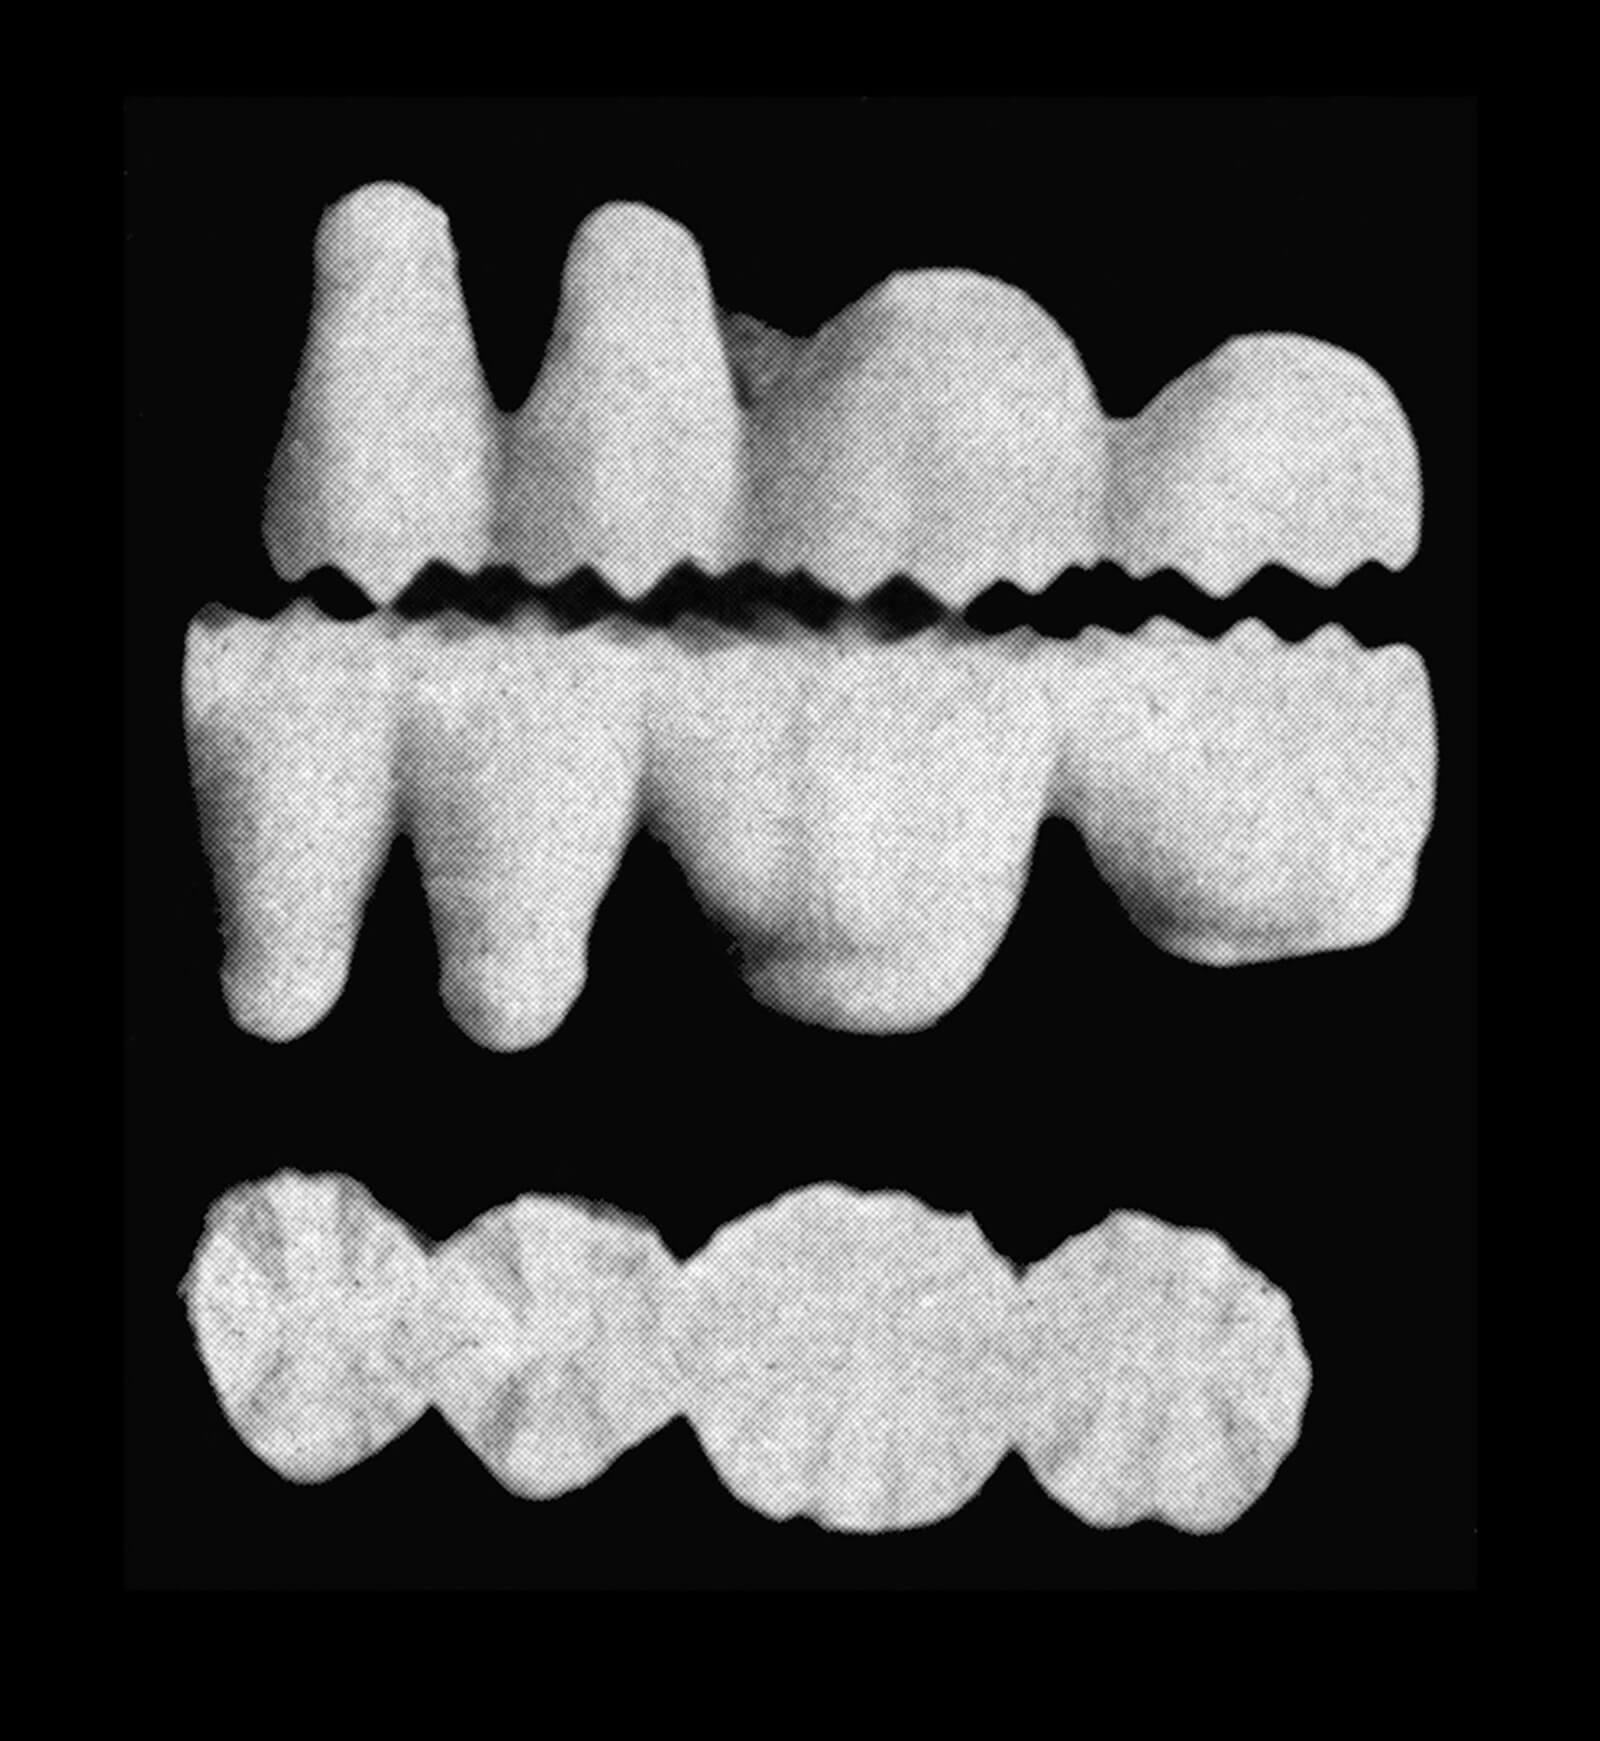 An image of posterior tooth blocks, designed by LeRoy E. Kurth in nineteen forty-five for improved shredding.